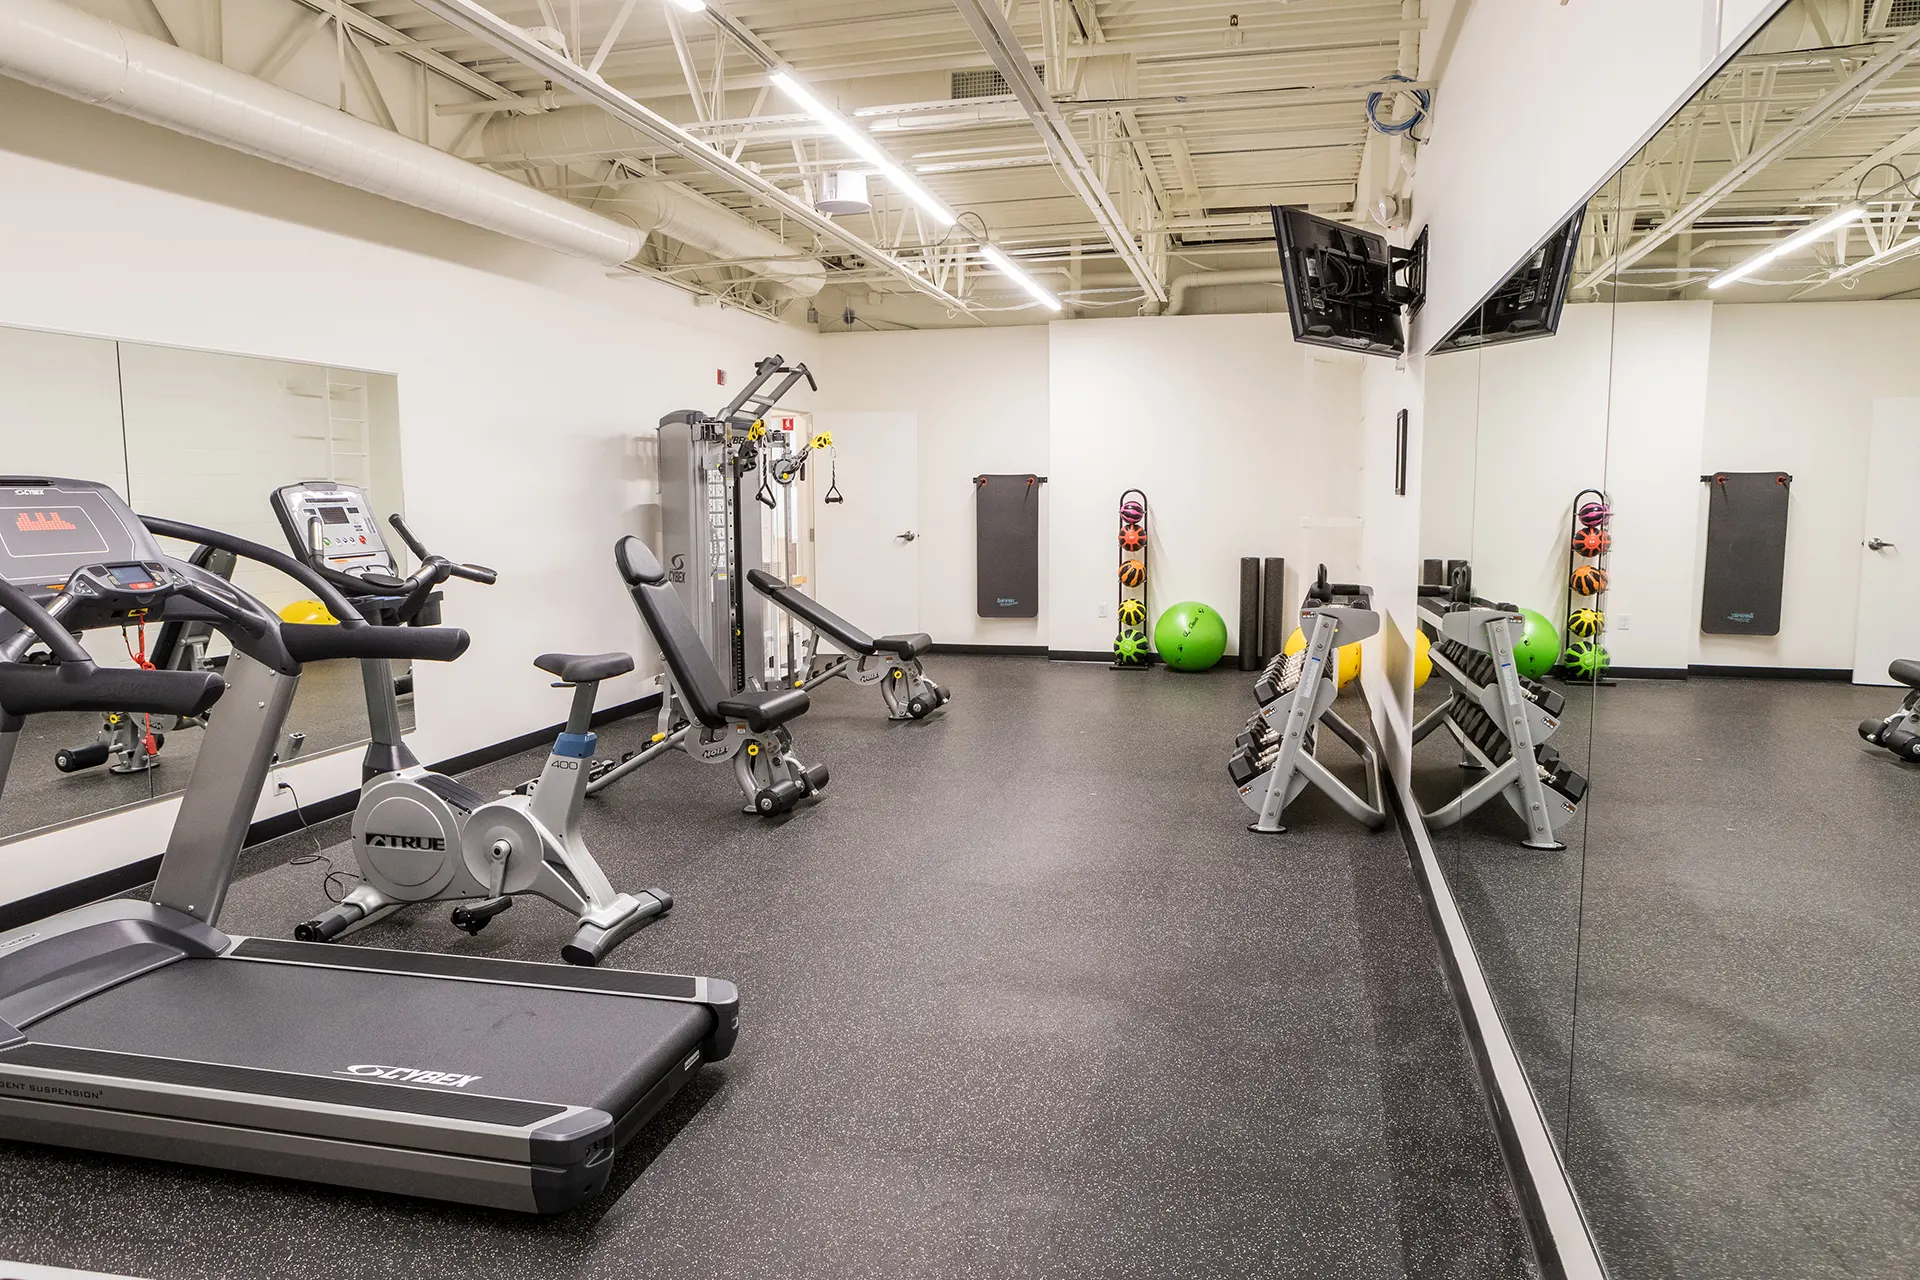 An image of the fitness center equipment at Lovering Nashua